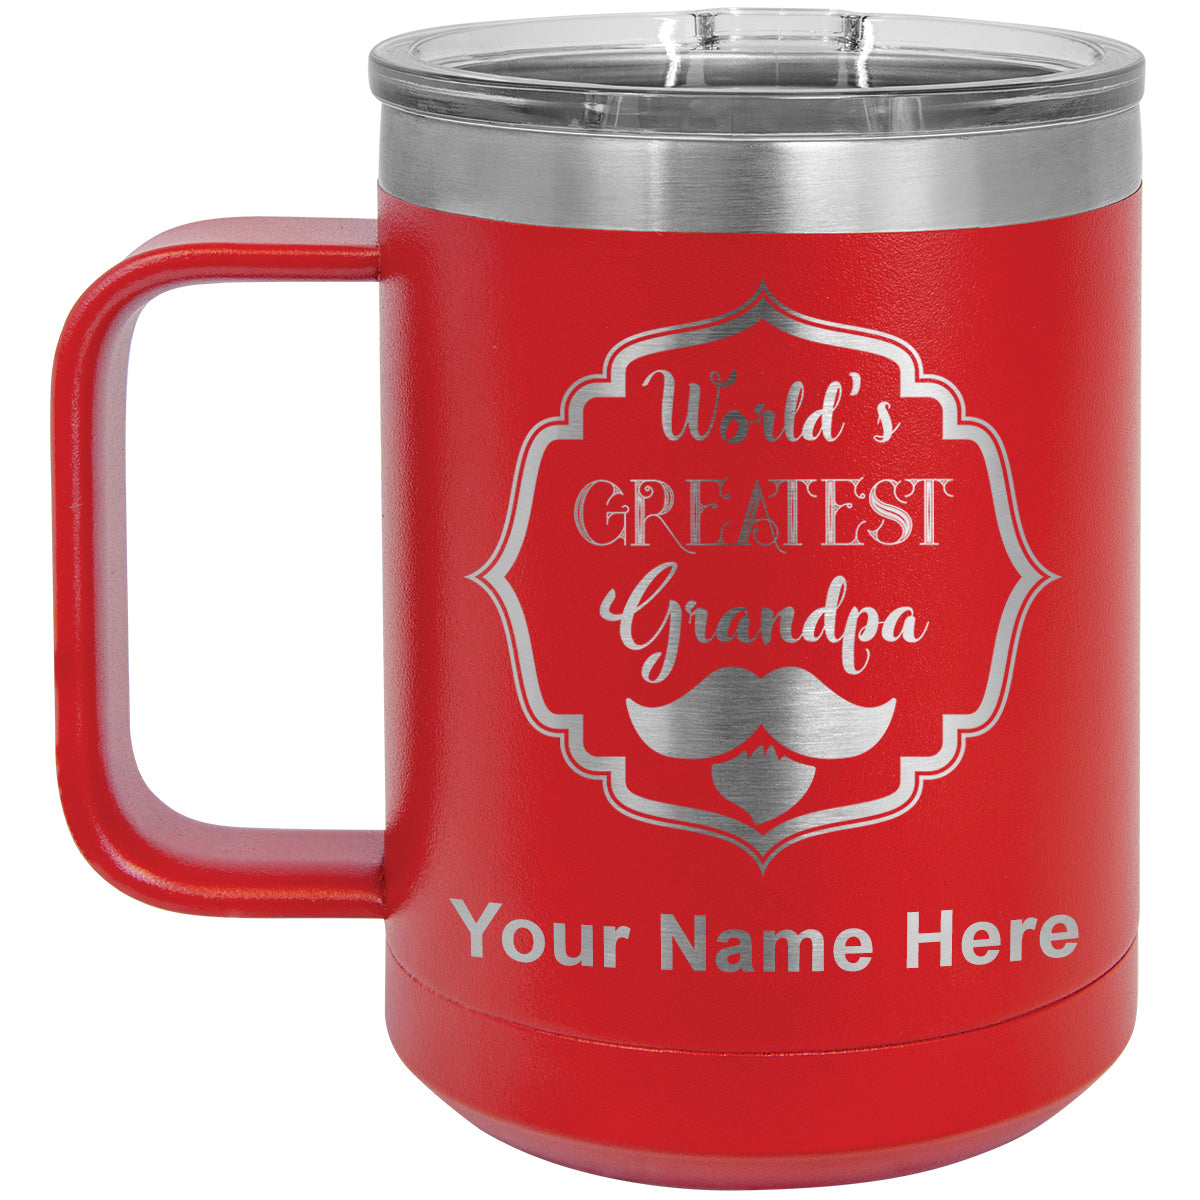 15oz Vacuum Insulated Coffee Mug, World's Greatest Grandpa, Personalized Engraving Included